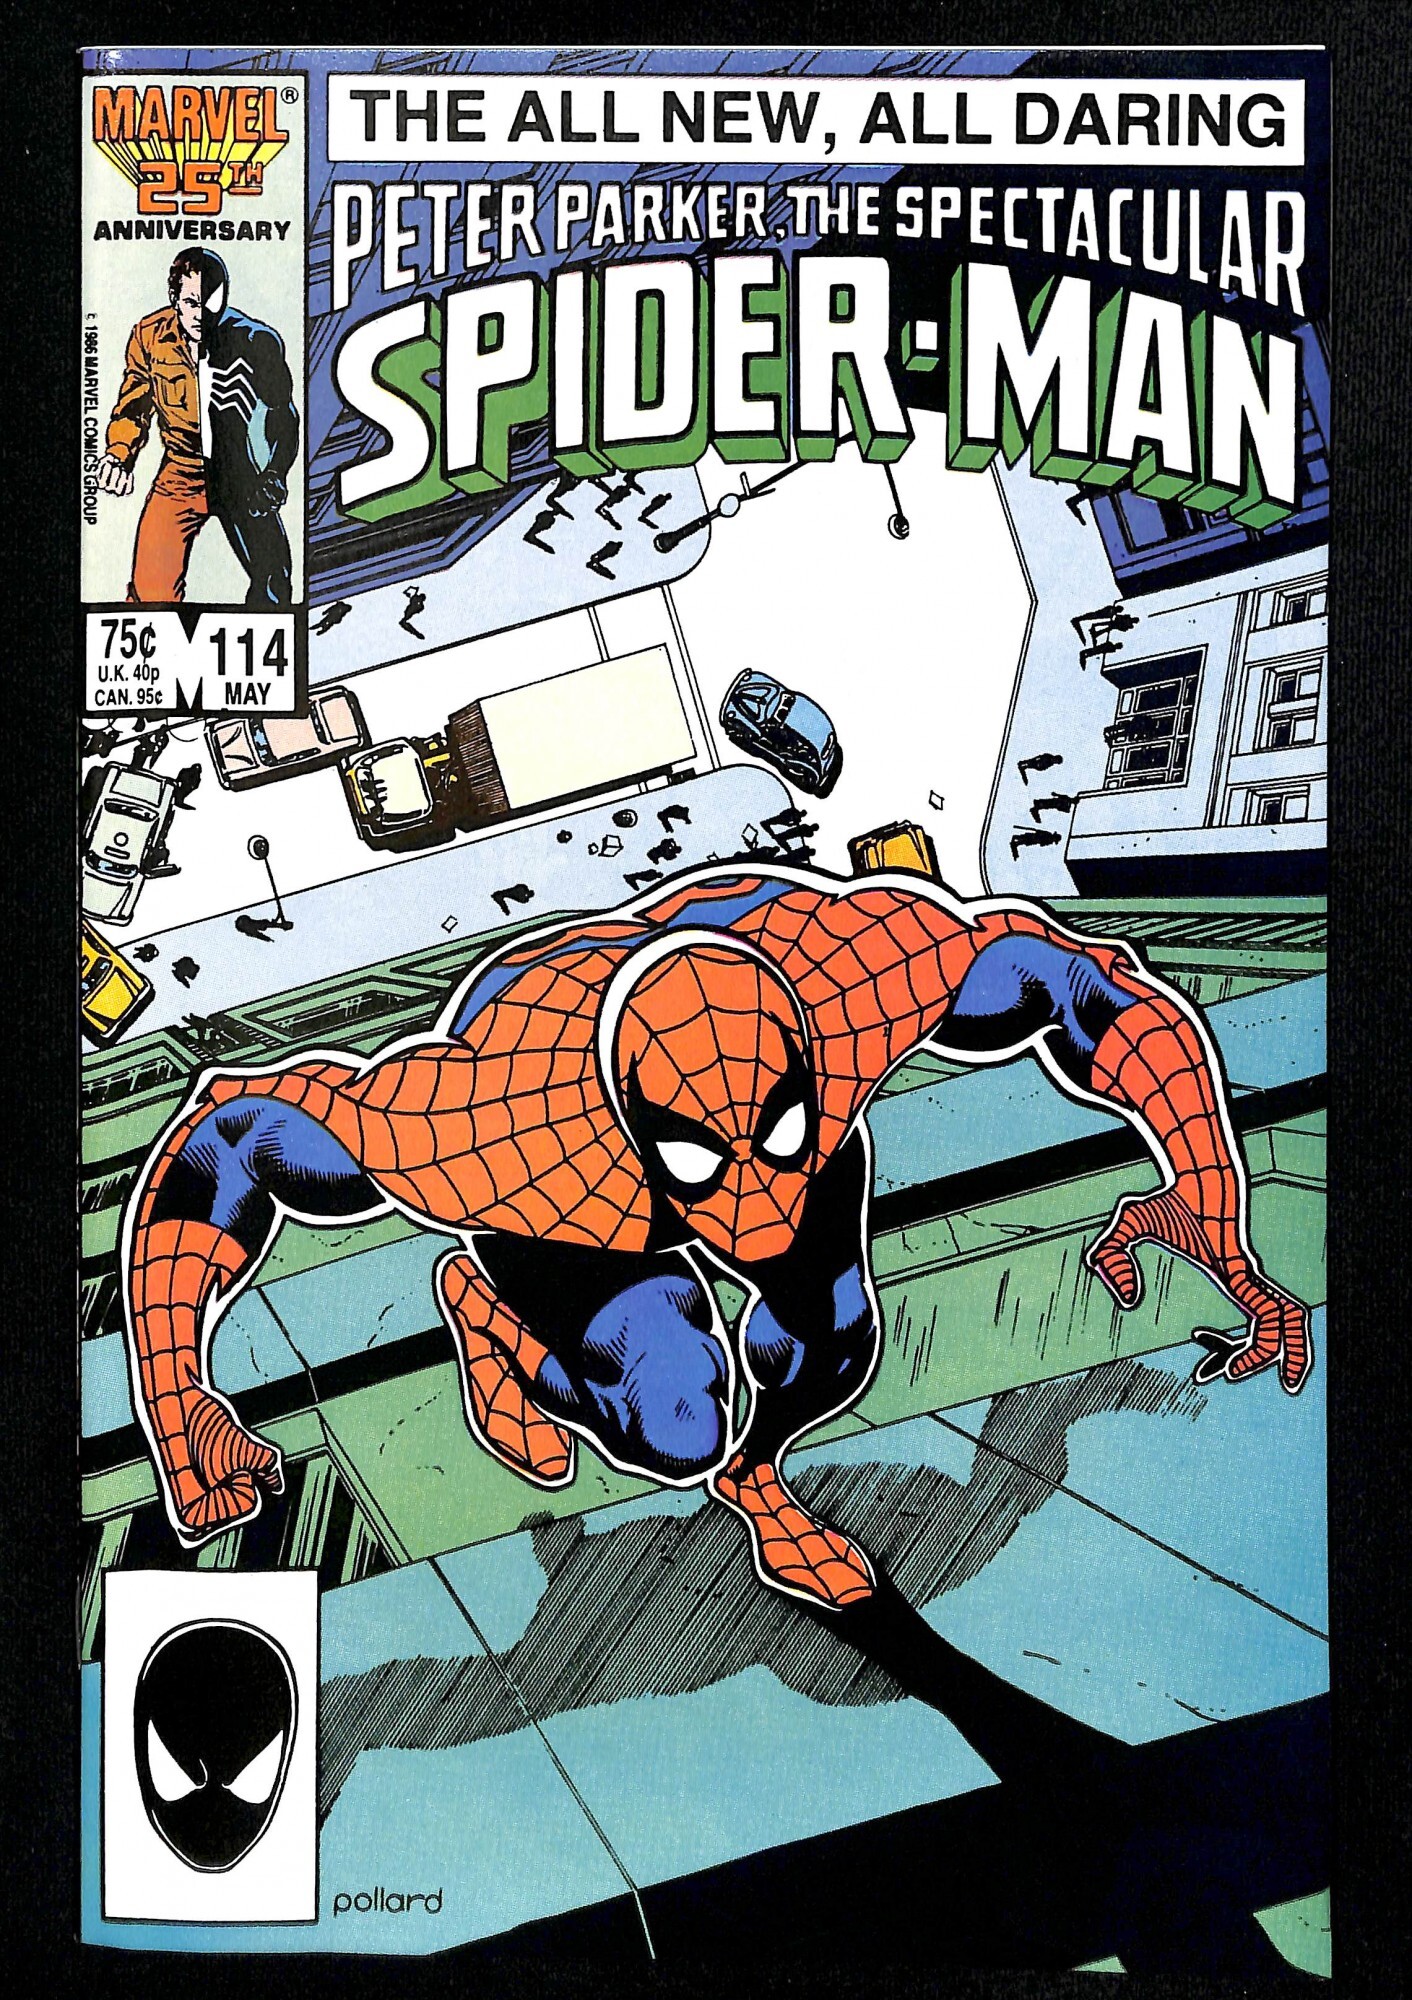 The Spectacular Spider-Man #114 (1986) | Comic Books - Copper Age ...